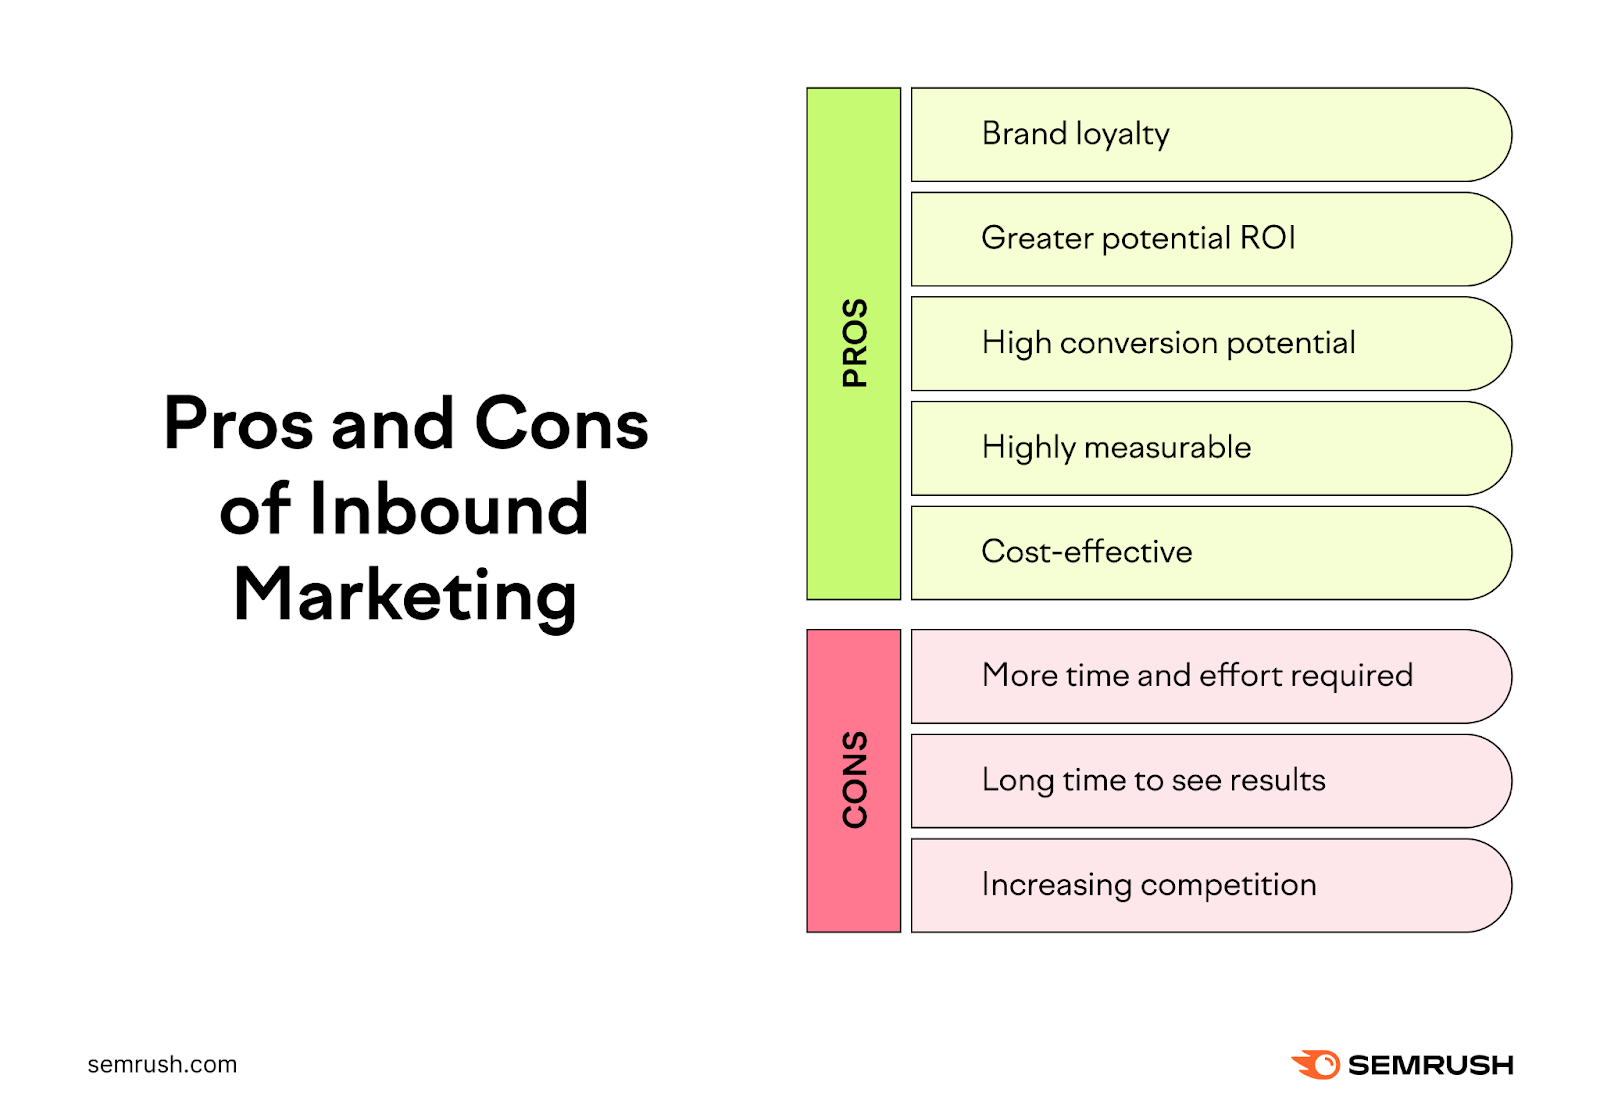 Pros and cons of inbound marketing